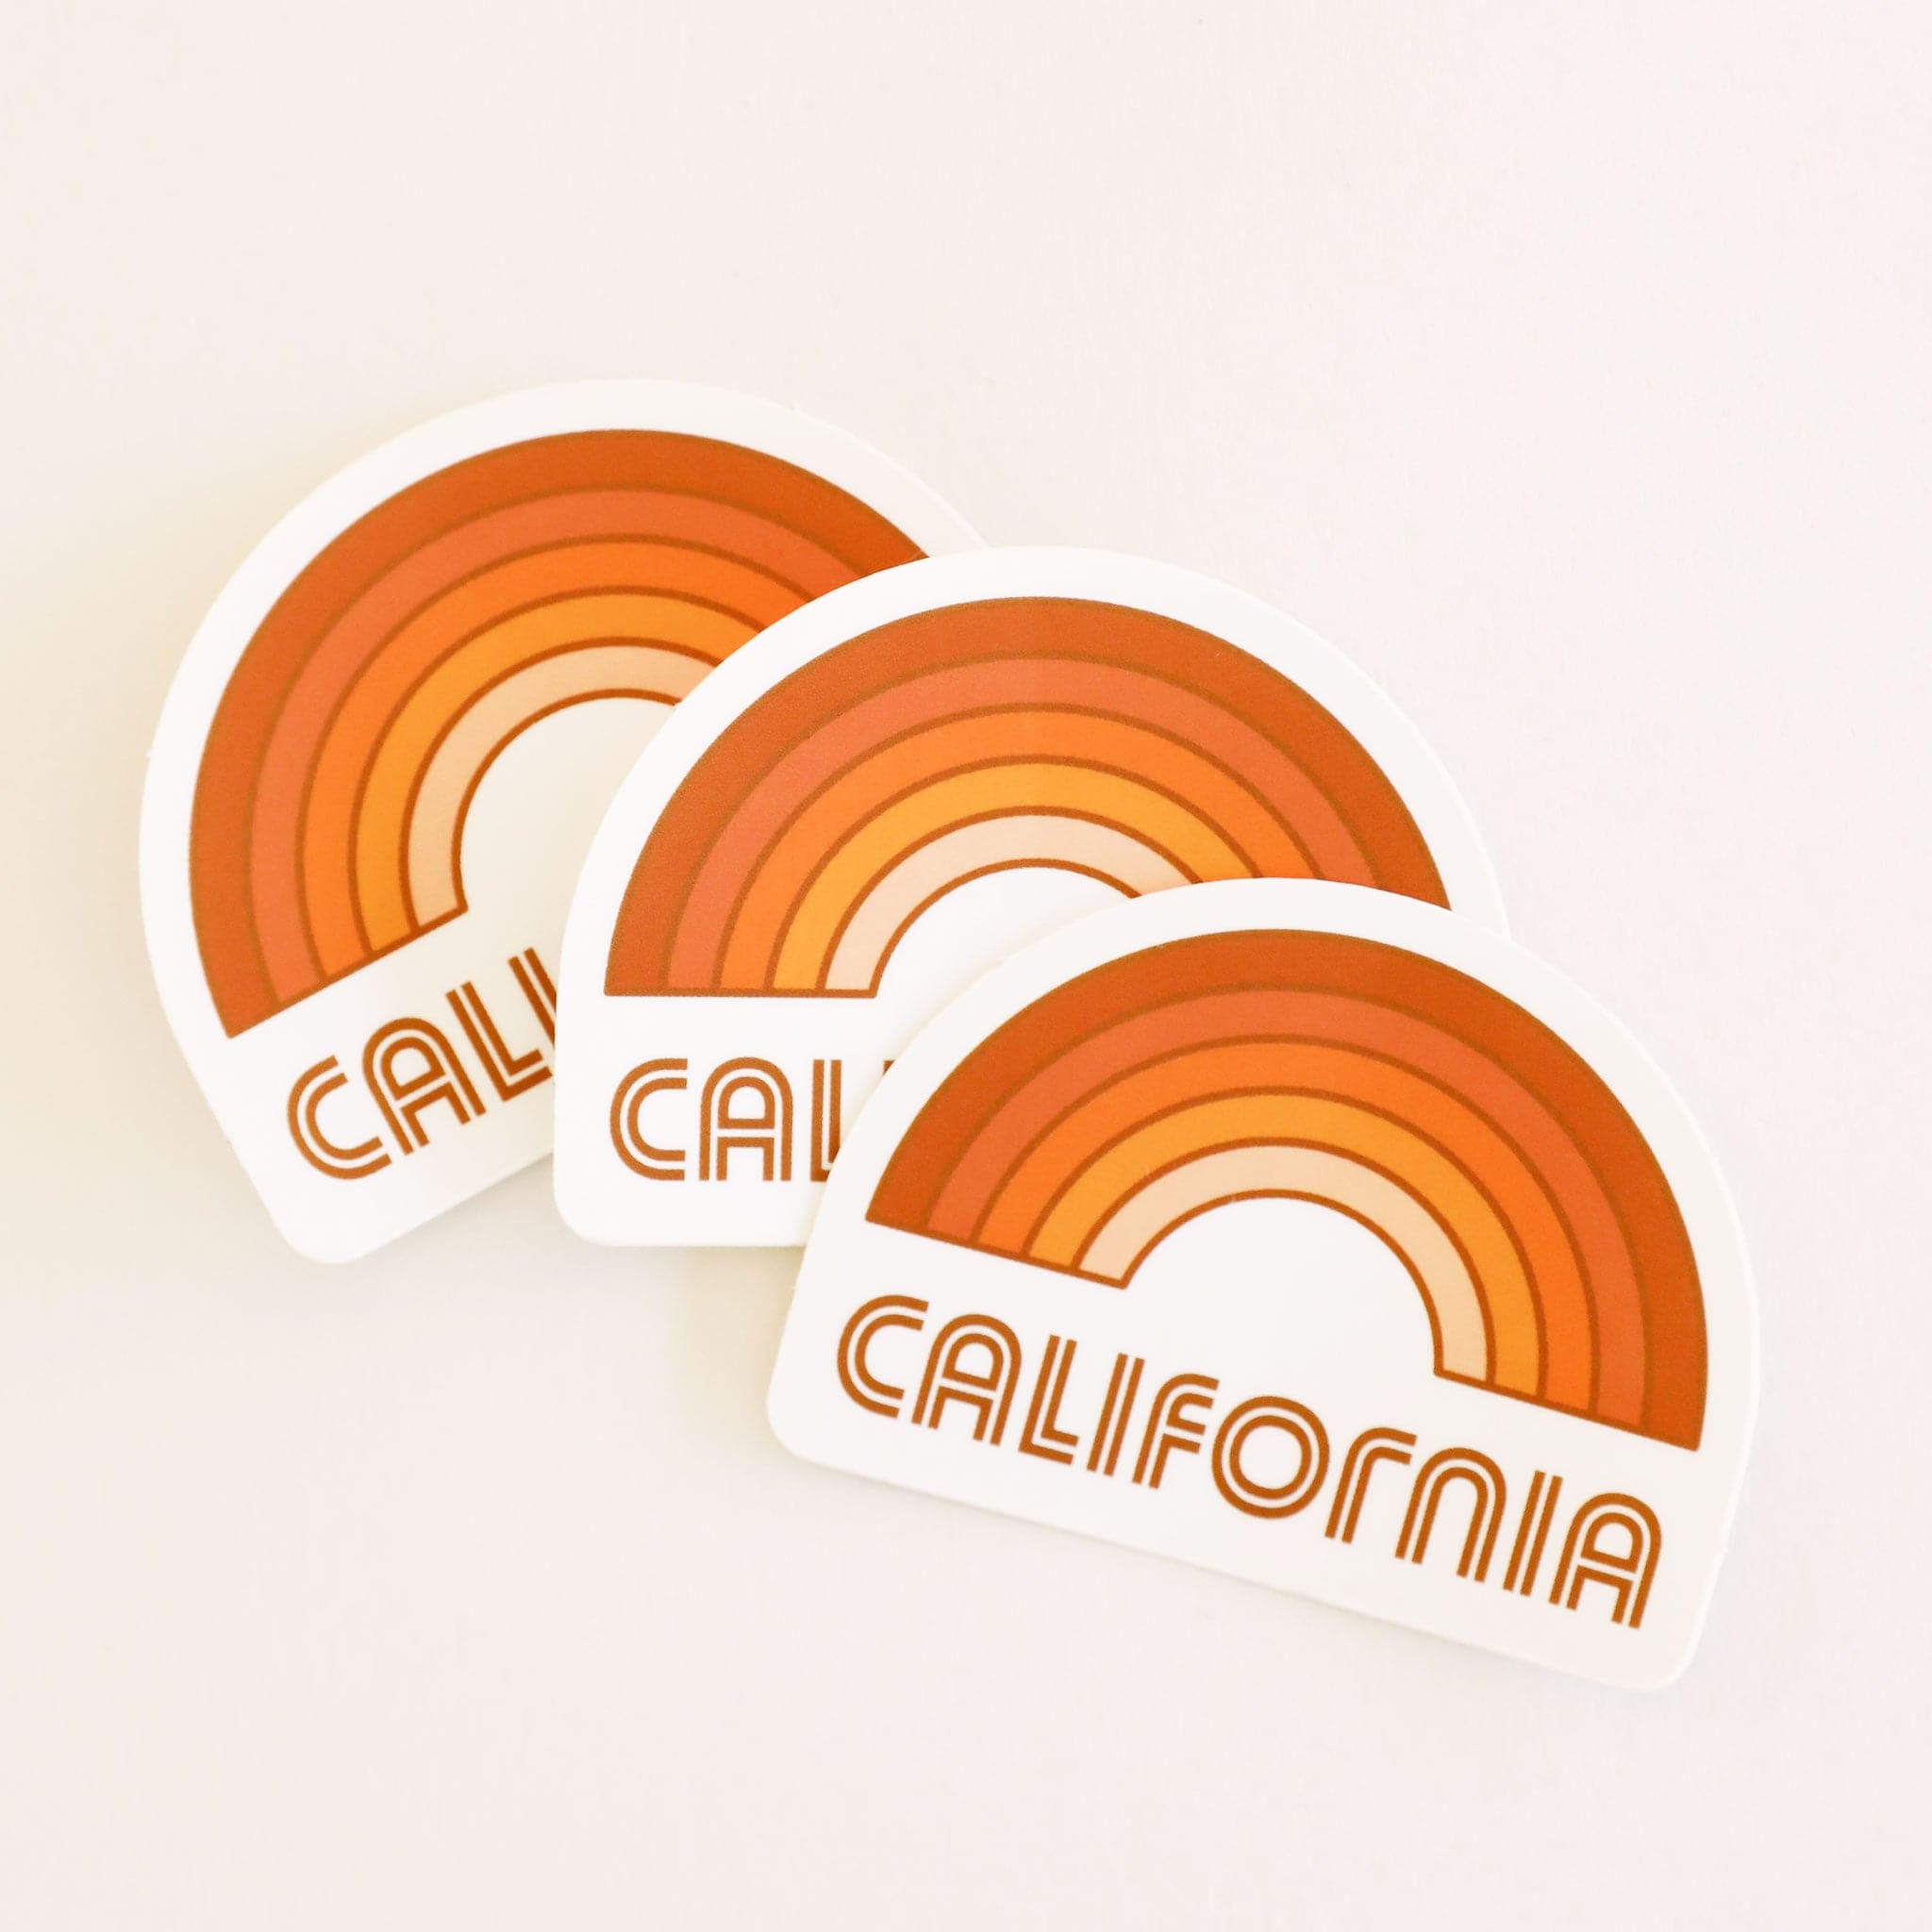 A rainbow sticker made up of different shades of orange and &quot;California&quot; written in orange letters on the bottom underneath the rainbow graphic.